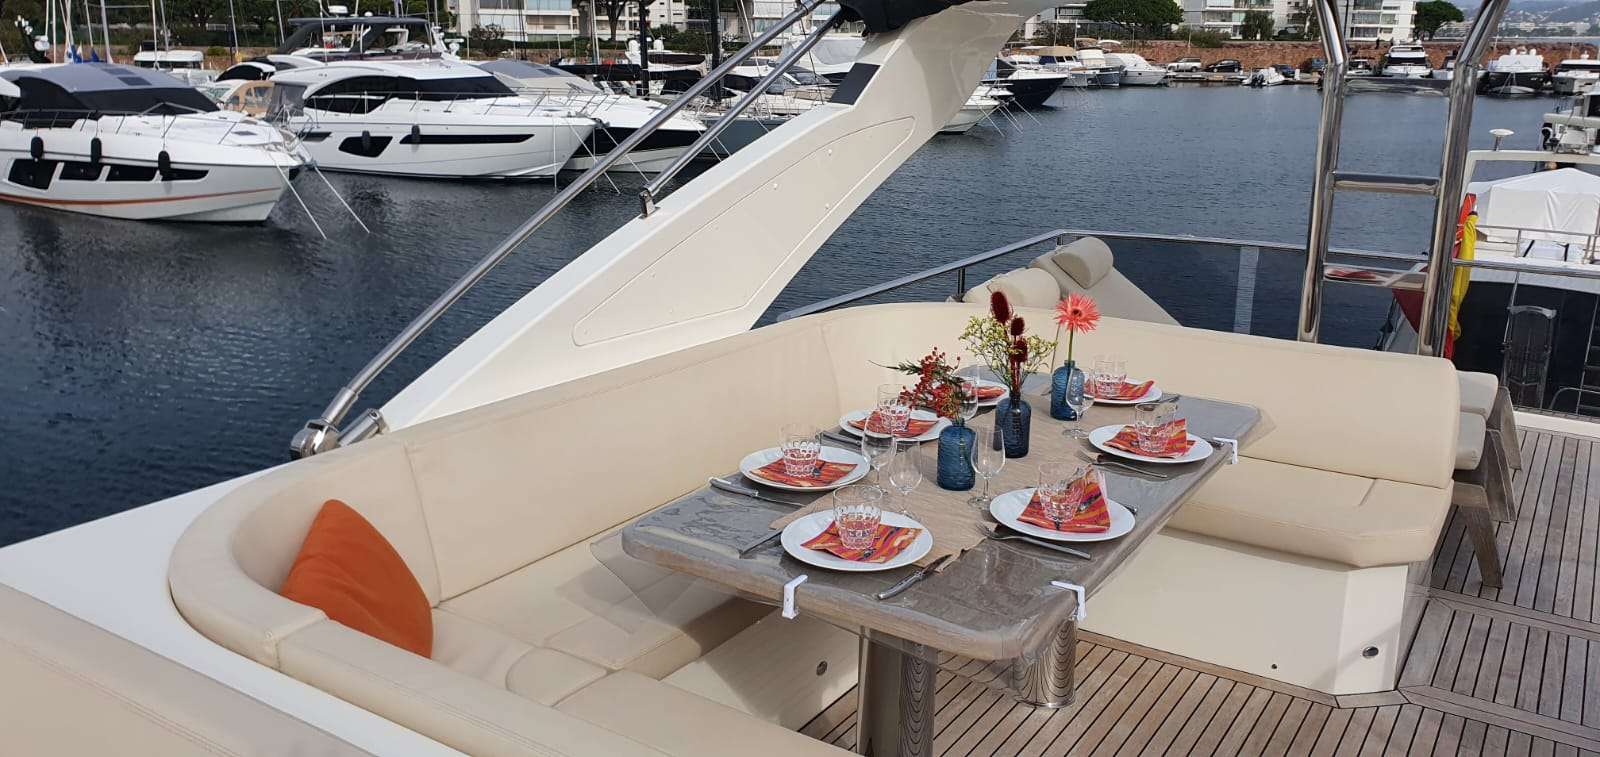 ABSOLUTE - Yacht Charter Marseille & Boat hire in Fr. Riviera, Corsica & Sardinia 3